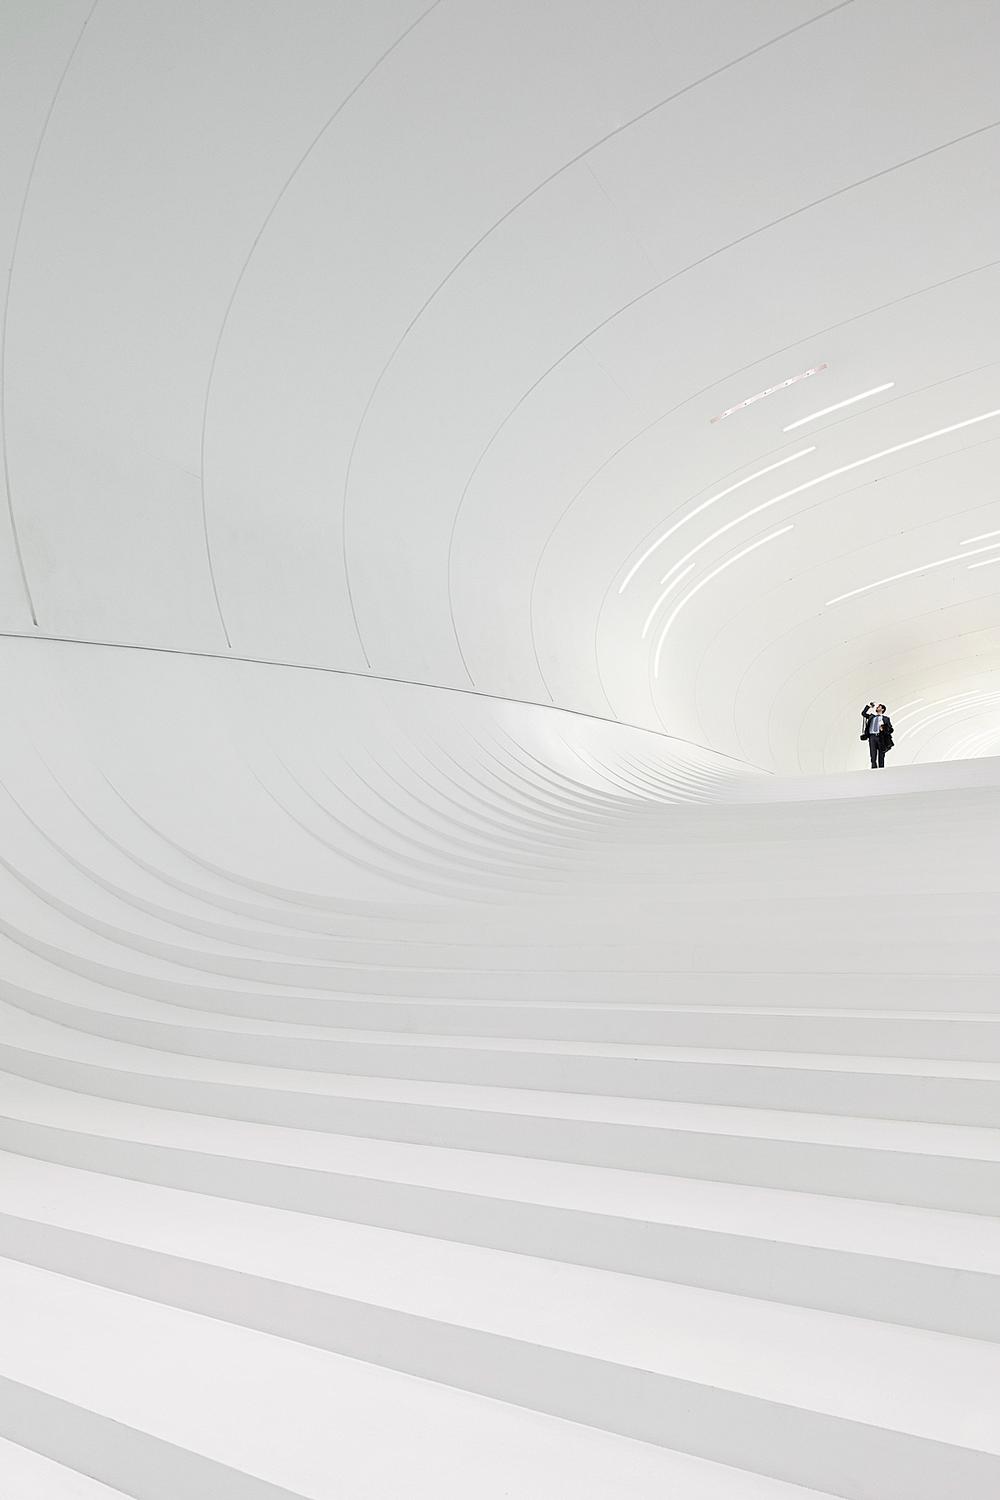 The Heydar Aliyev Centre in Baku. Zaha Hadid described the building as “an incredible achievement” when it won London Design Museum’s Design of the Year in 2014 / PHOTO: HUFTON + CROW